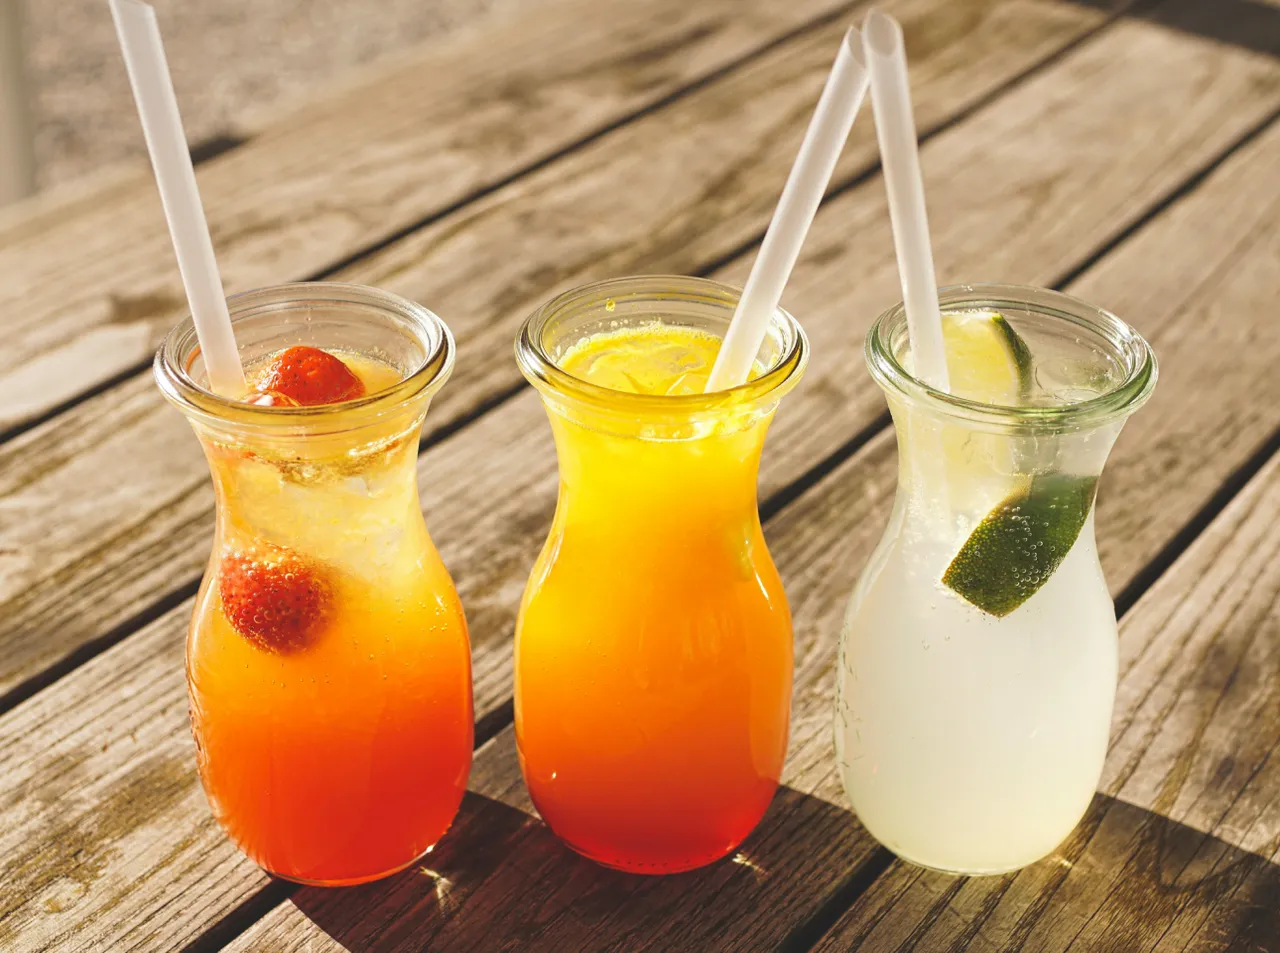 Try these Summer Special Tempting Fusion Drinks!